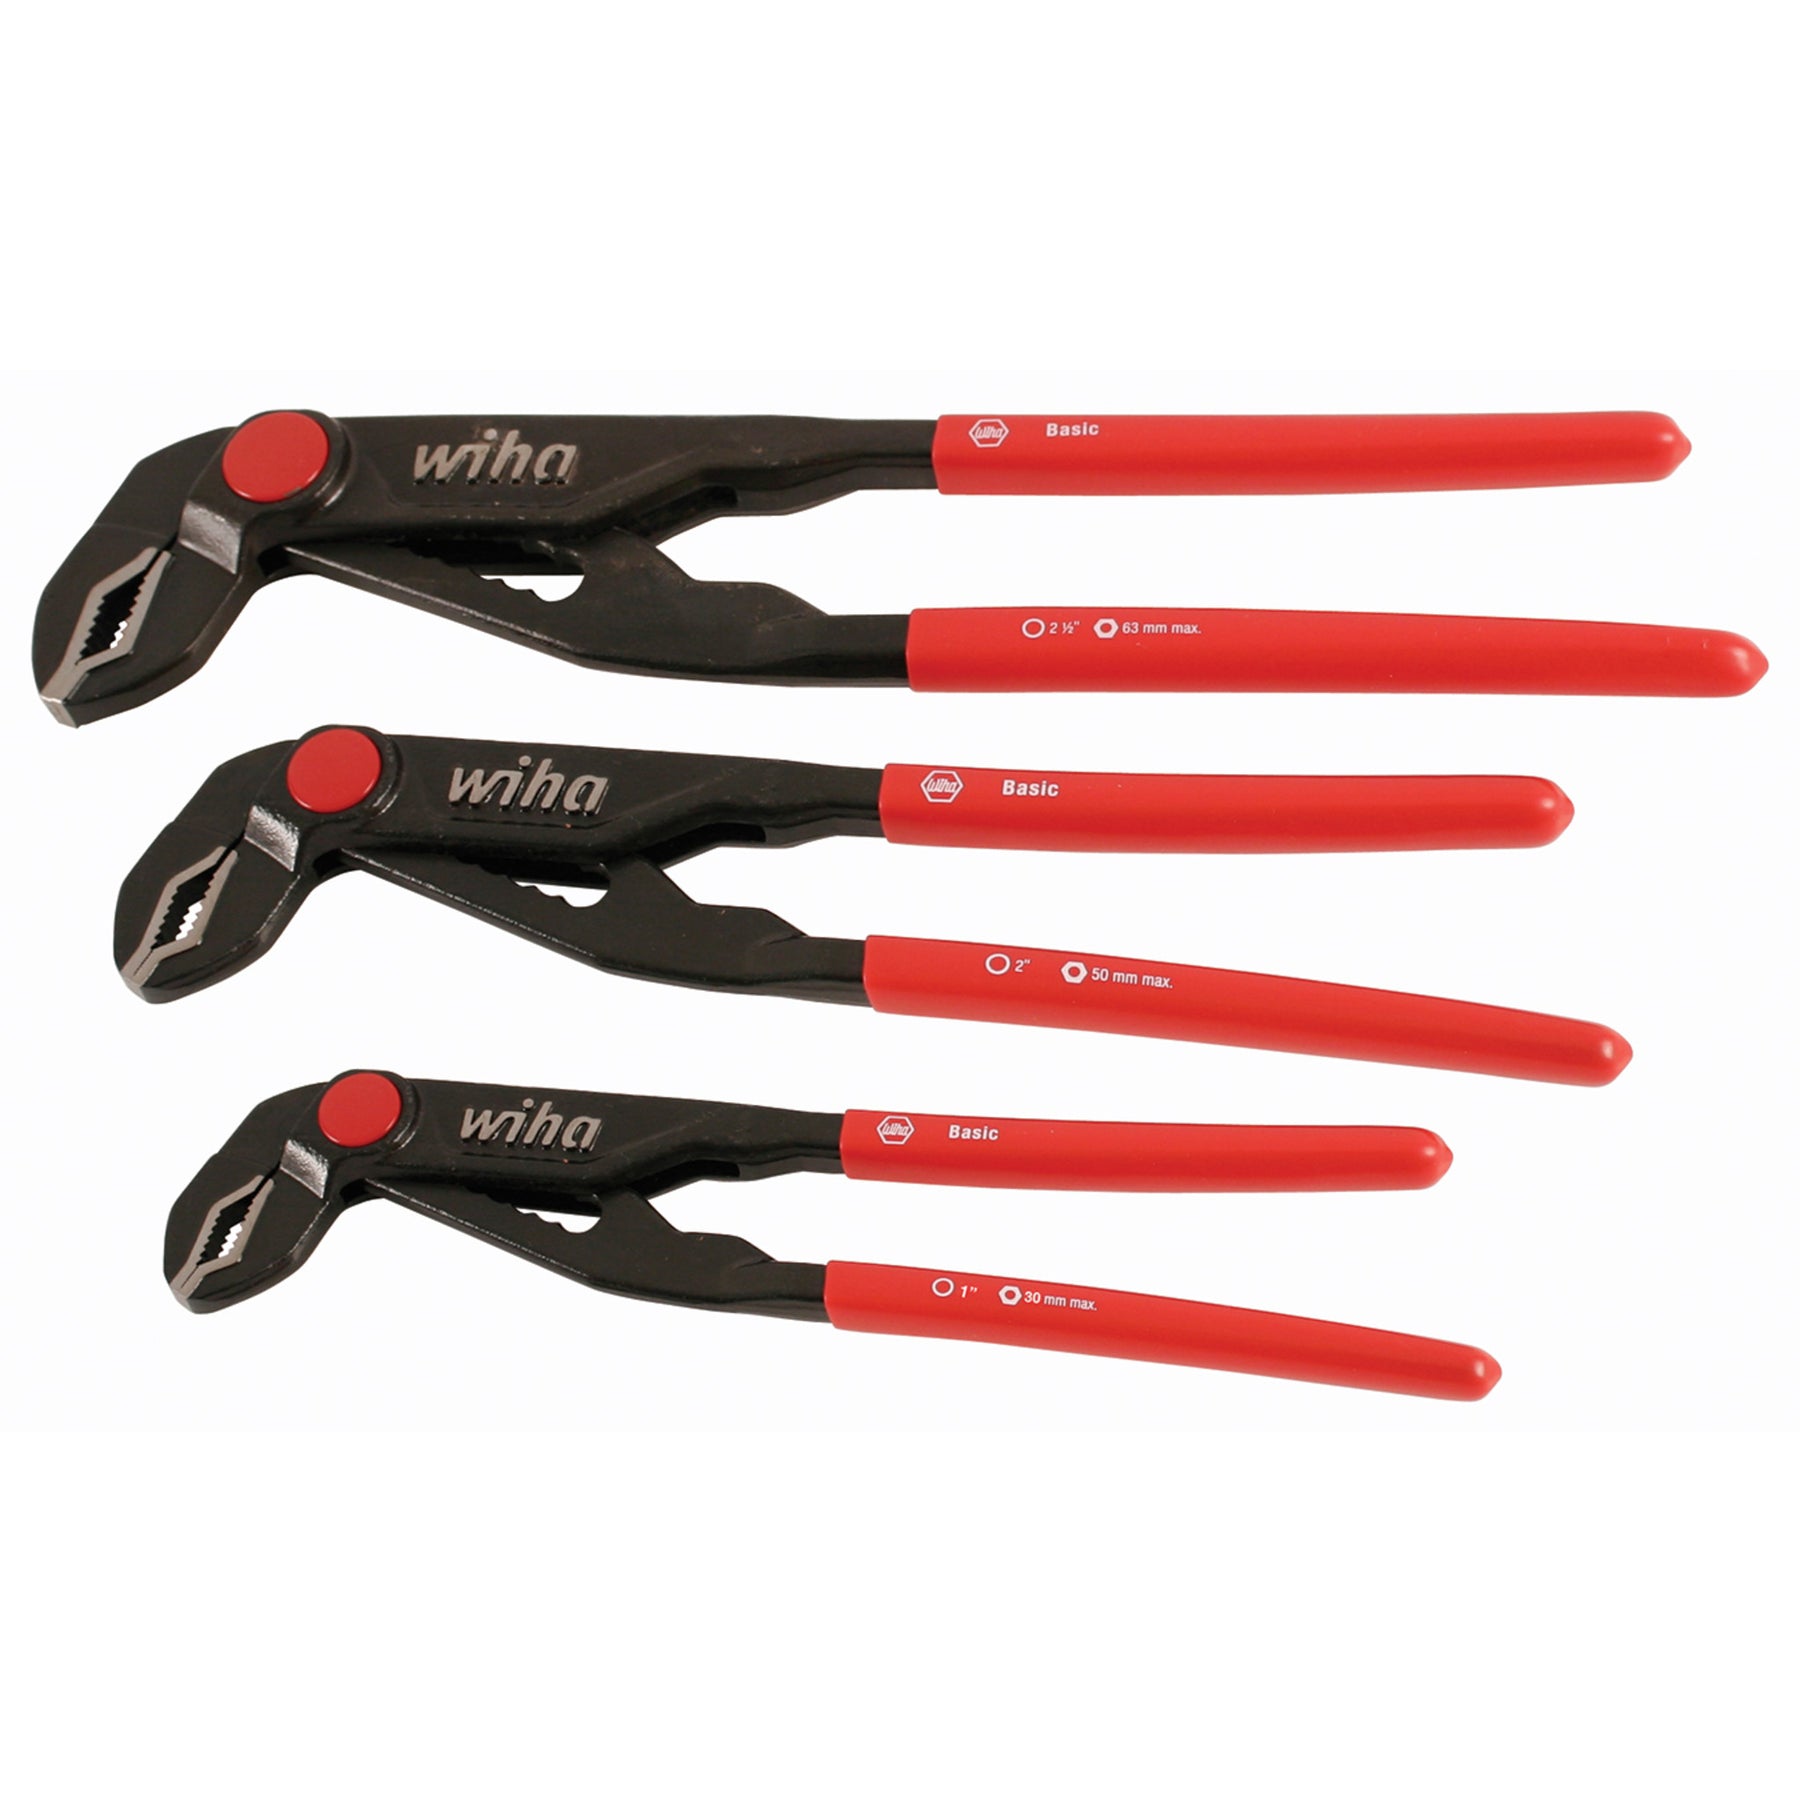 Wiha 32669 3 Piece Classic Grip V-Jaw Tongue and Groove Pliers Set